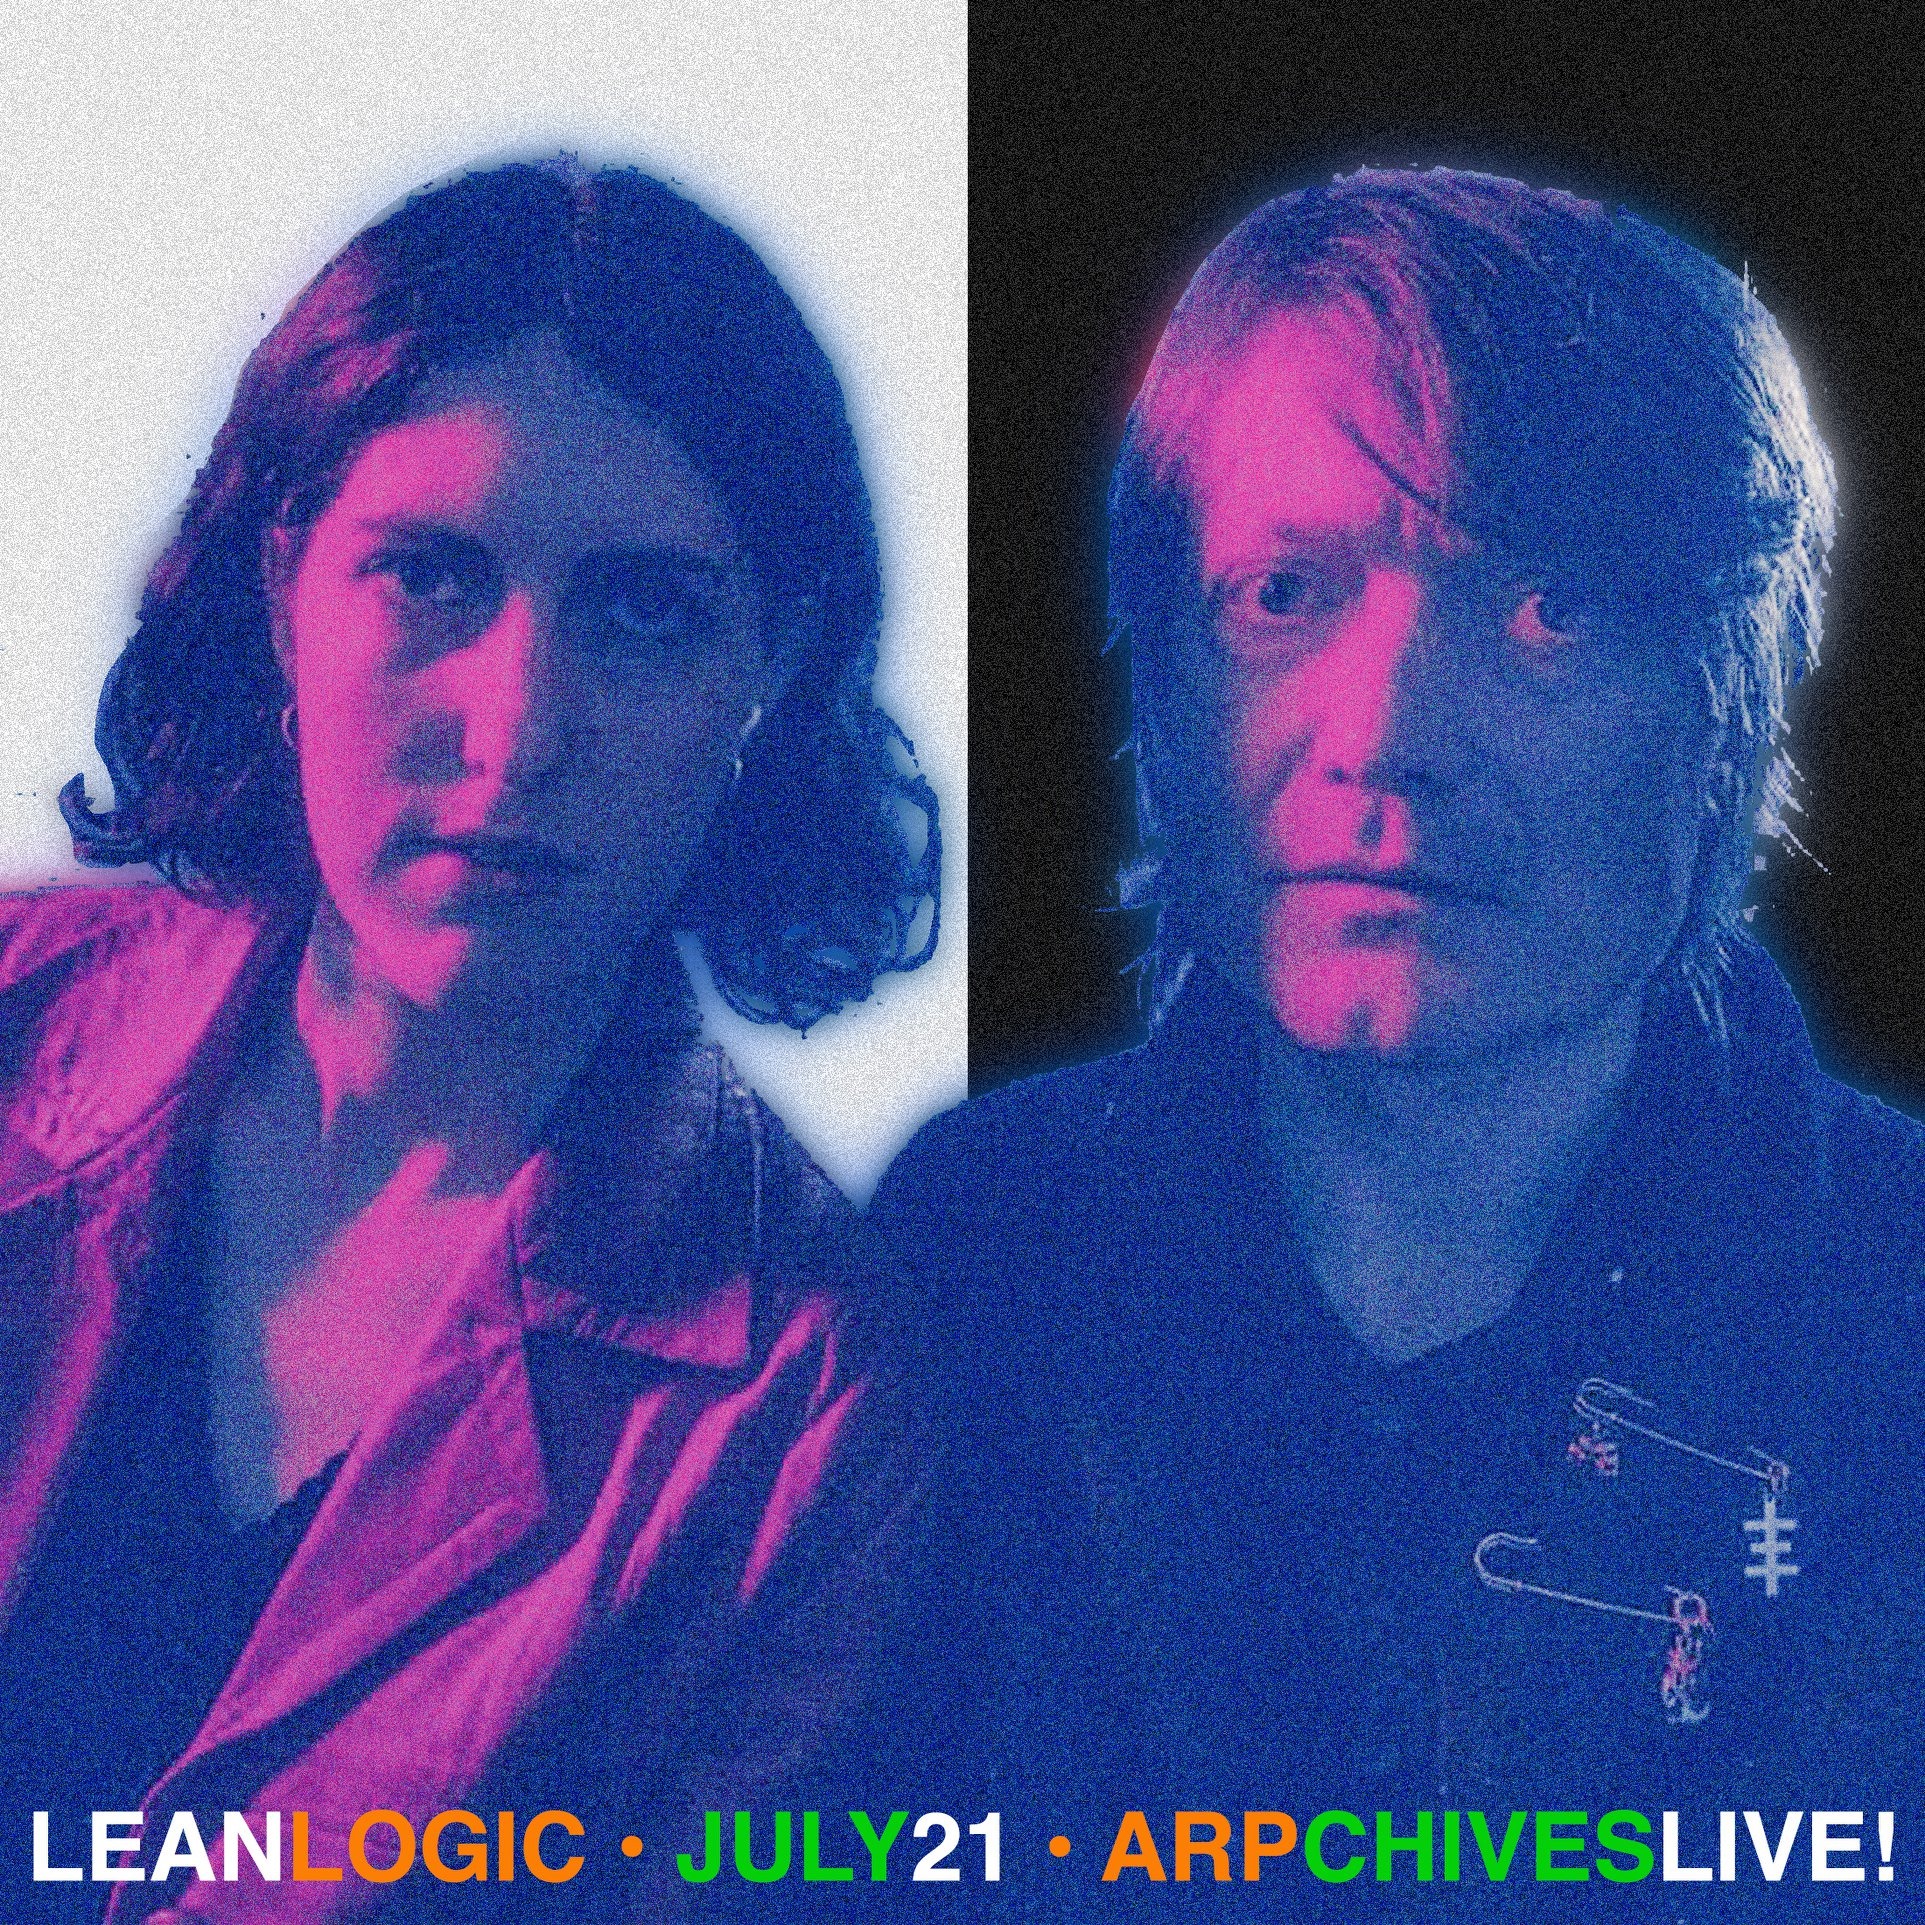 ARPchives LIVE! featuring Lean Logic